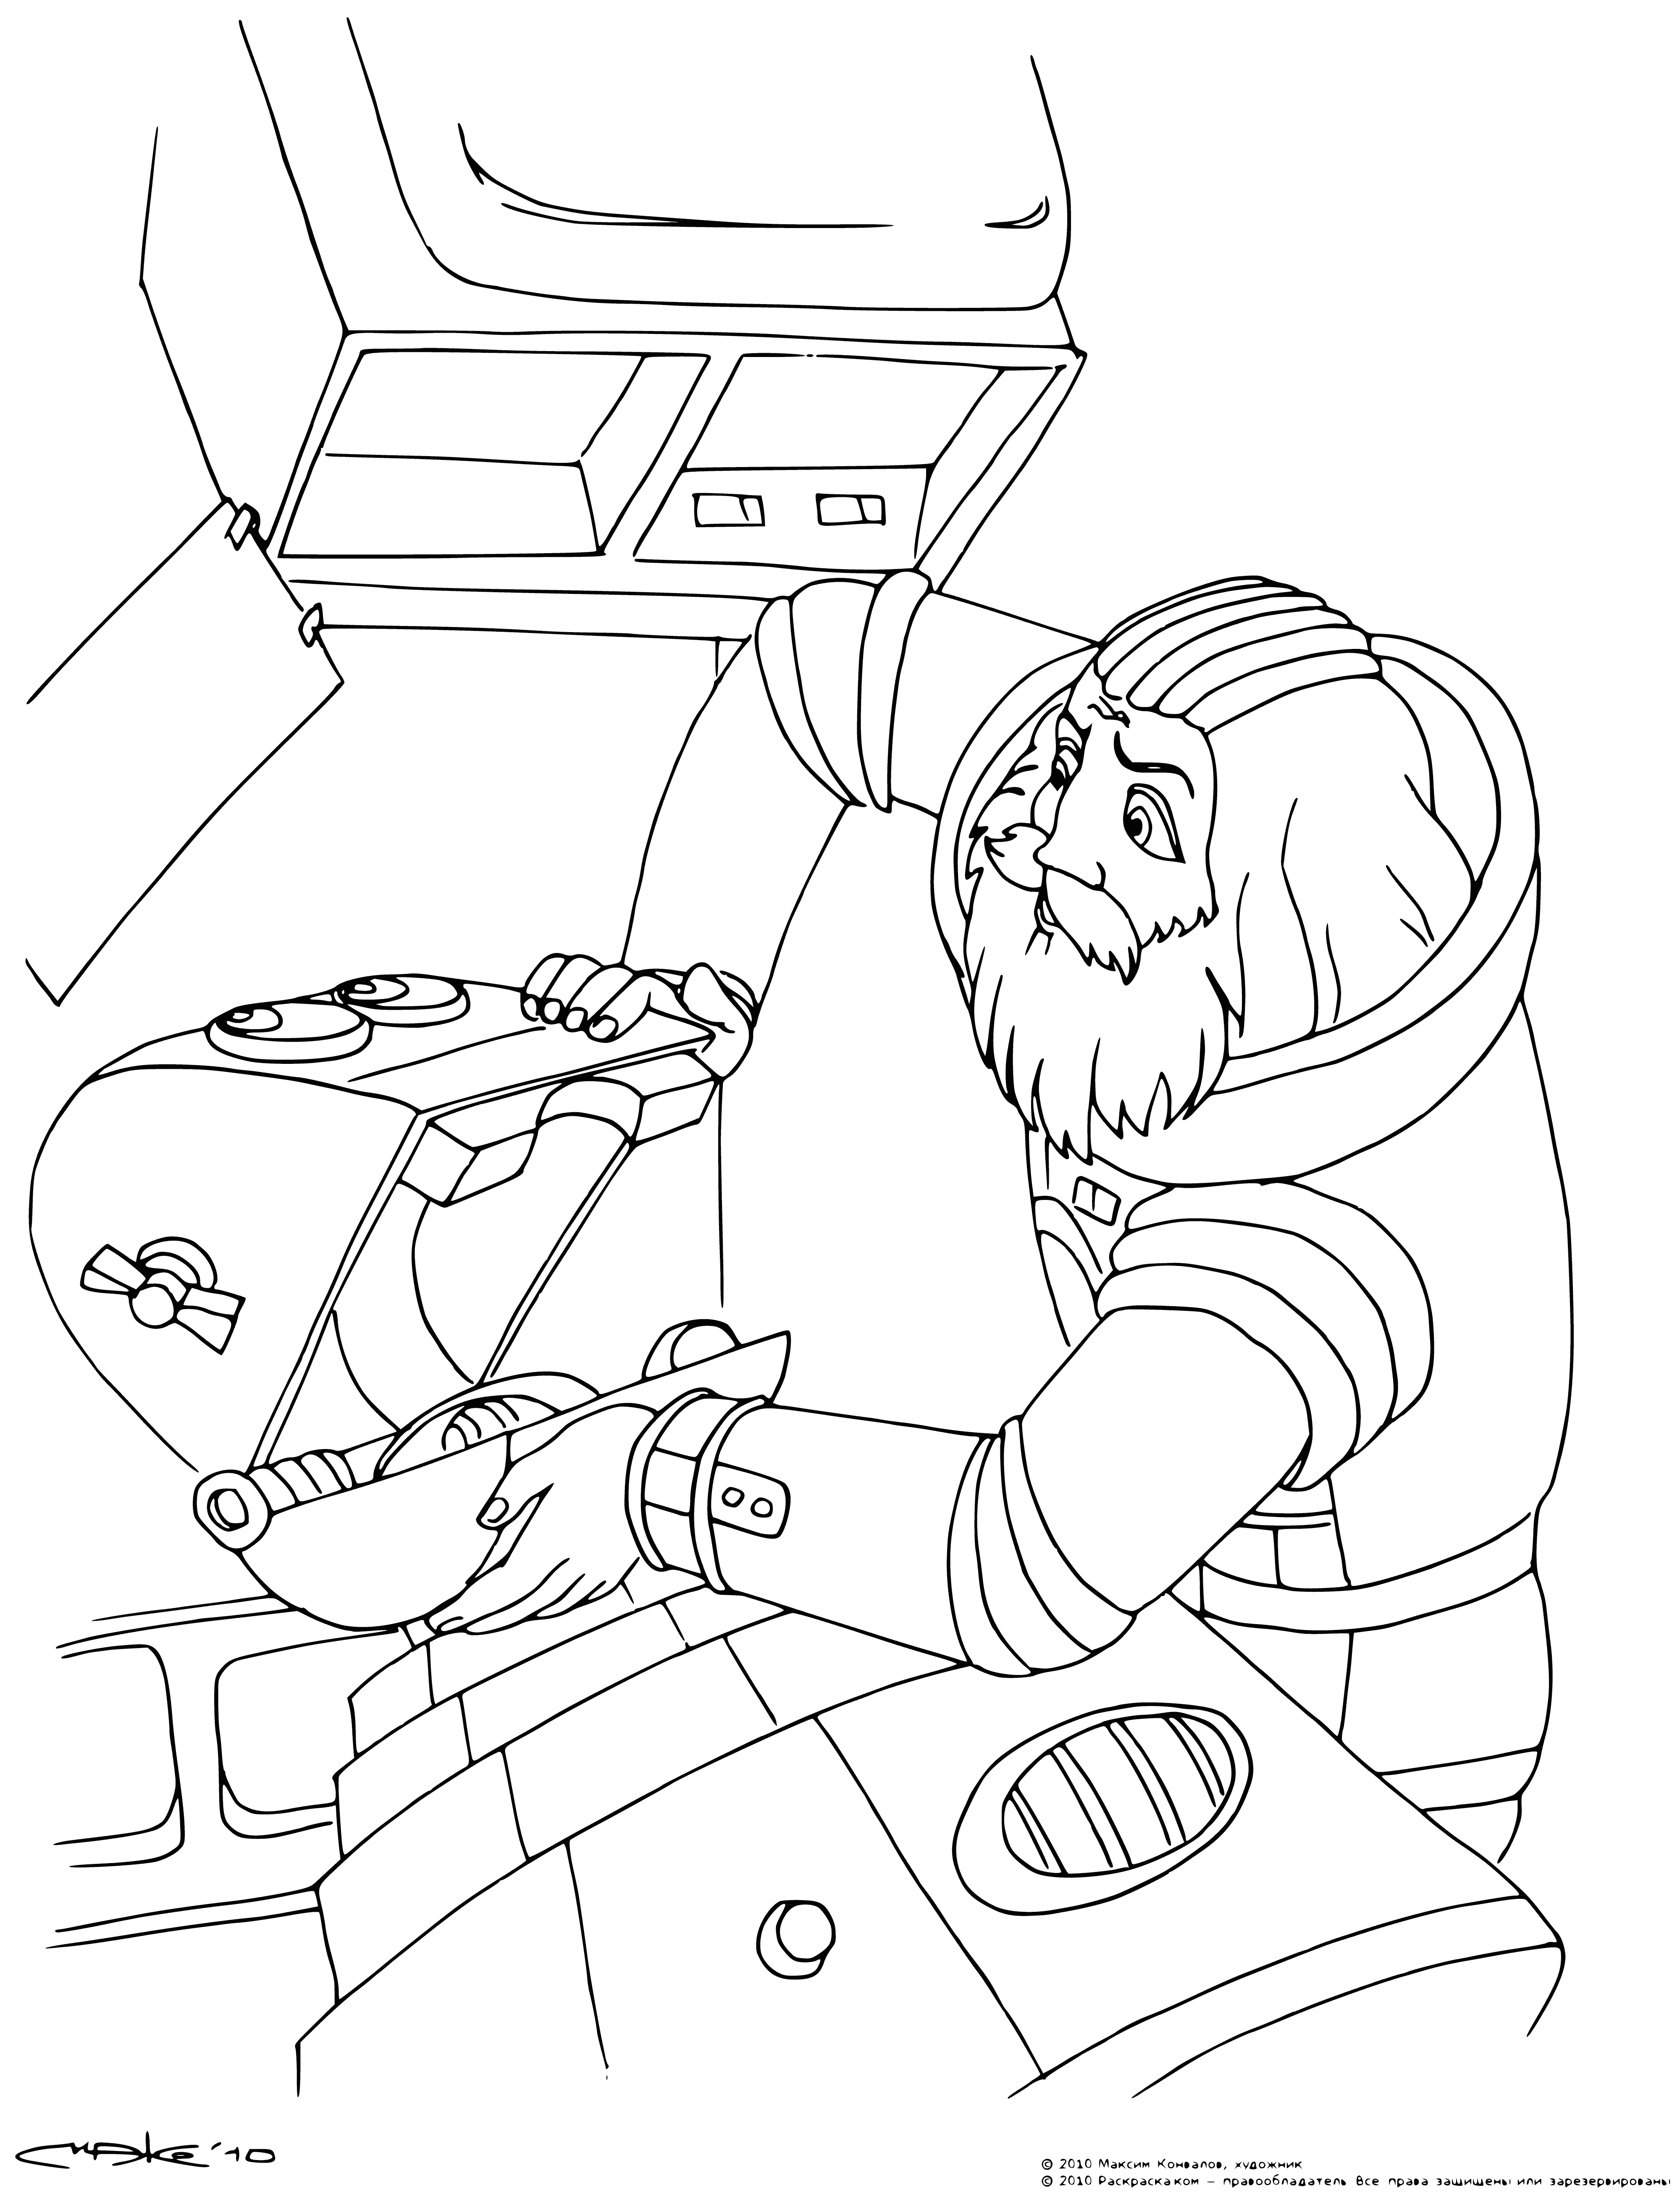 coloring page: Capt. Green and his robotic friend explore an unknown planet, discovering an artificial structure in the distance. Surrounded by strange, giant plants and green fog.